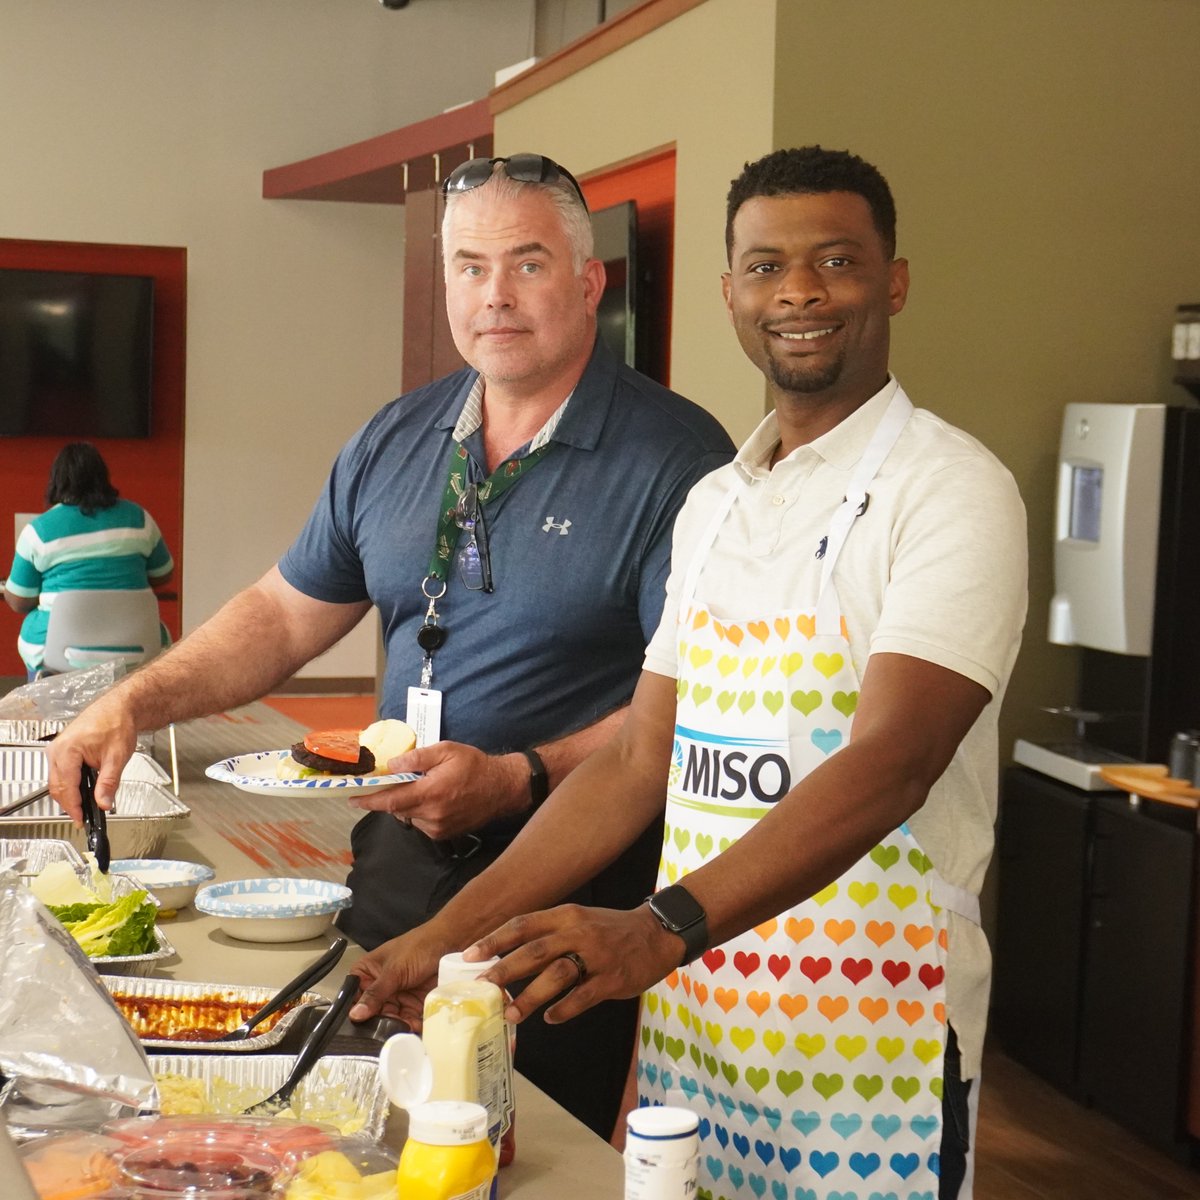 MISO's Little Rock office kicked off the annual Arkansas Foodbank Summer Cereal Drive. Join us through July 19 for a friendly competition in this fight to end hunger. lnkd.in/guiMbfxU #ArkansasFoodbank #ARFoodbank #THV11SCD #TeamMISO